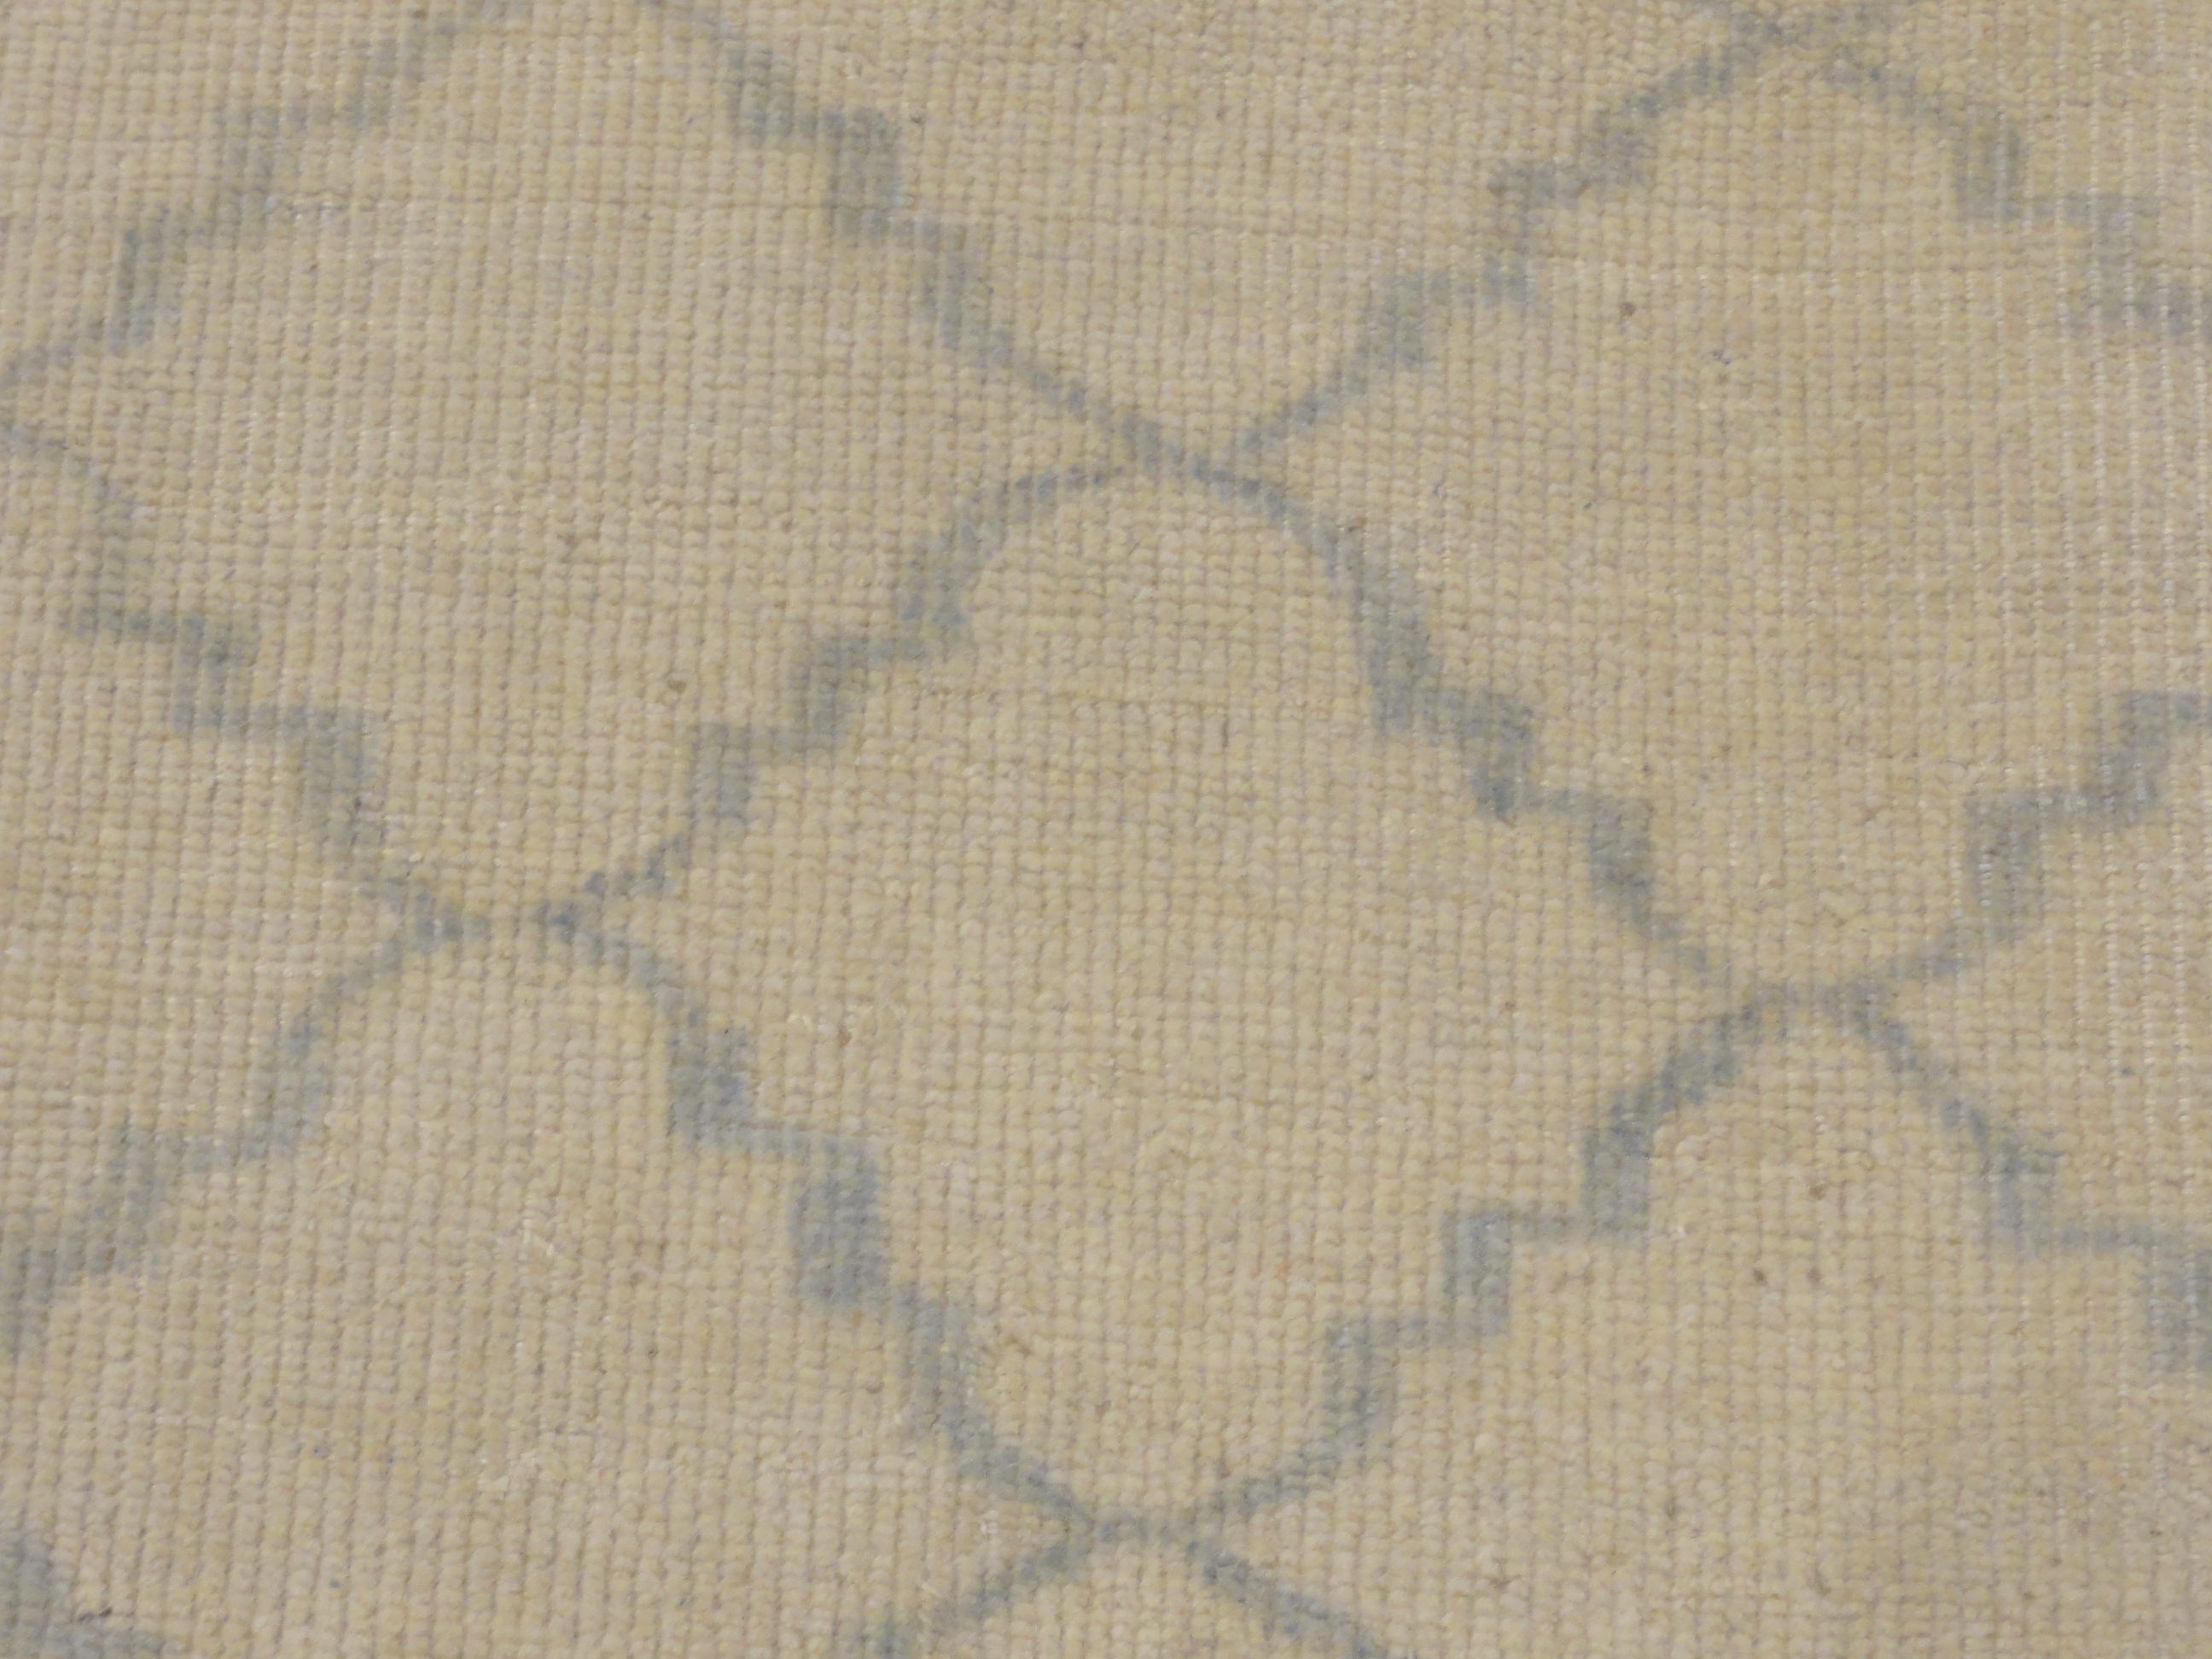 Blue and Beige Modern Trellised Rug. A piece of genuine woven carpet art sold by the Santa Barbara Design Center, Rugs and More.